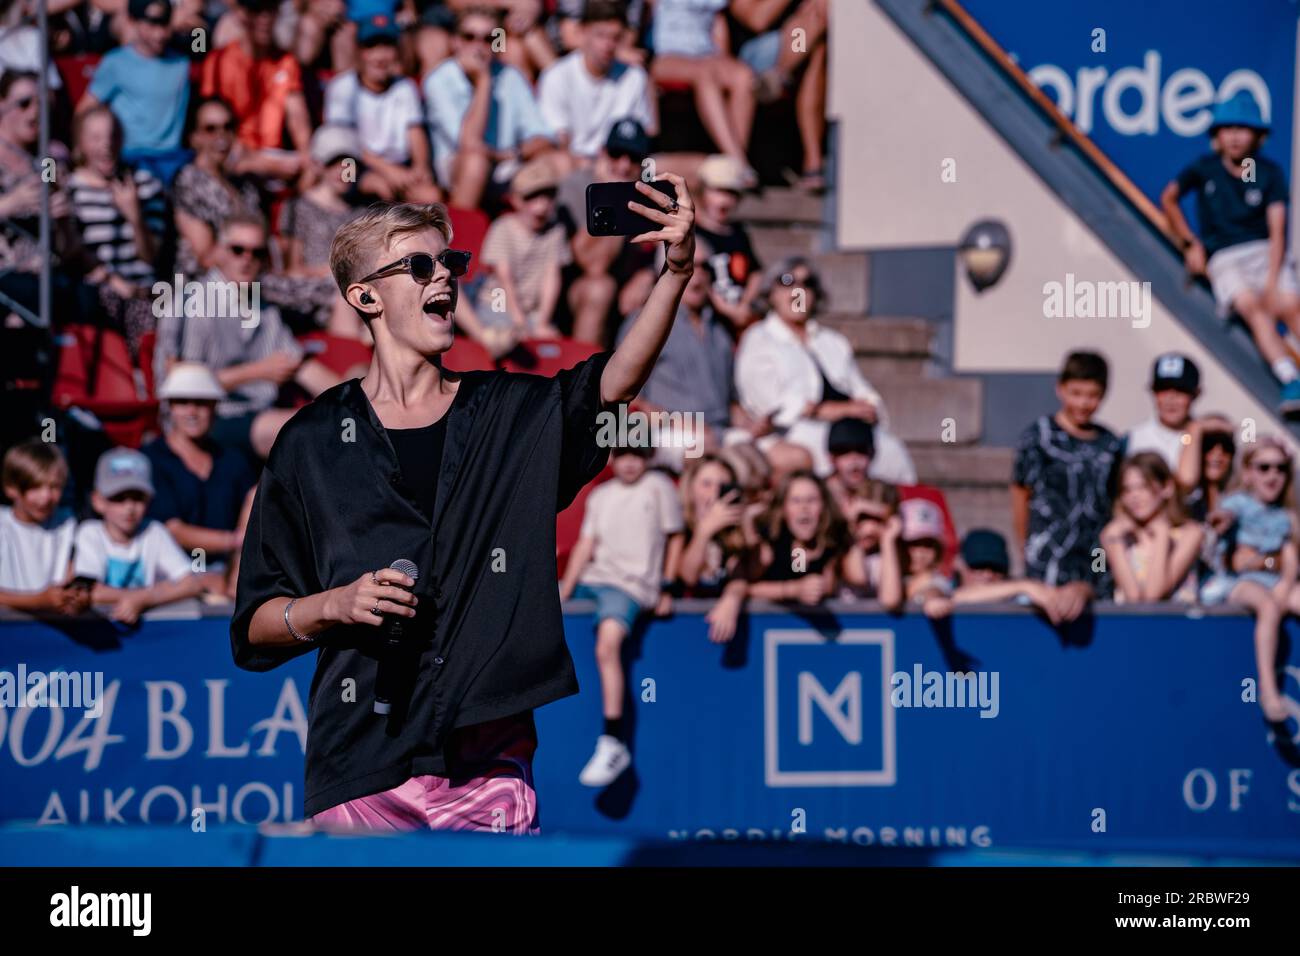 Theoz during the open ceremony for the Nordea open. Stock Photo